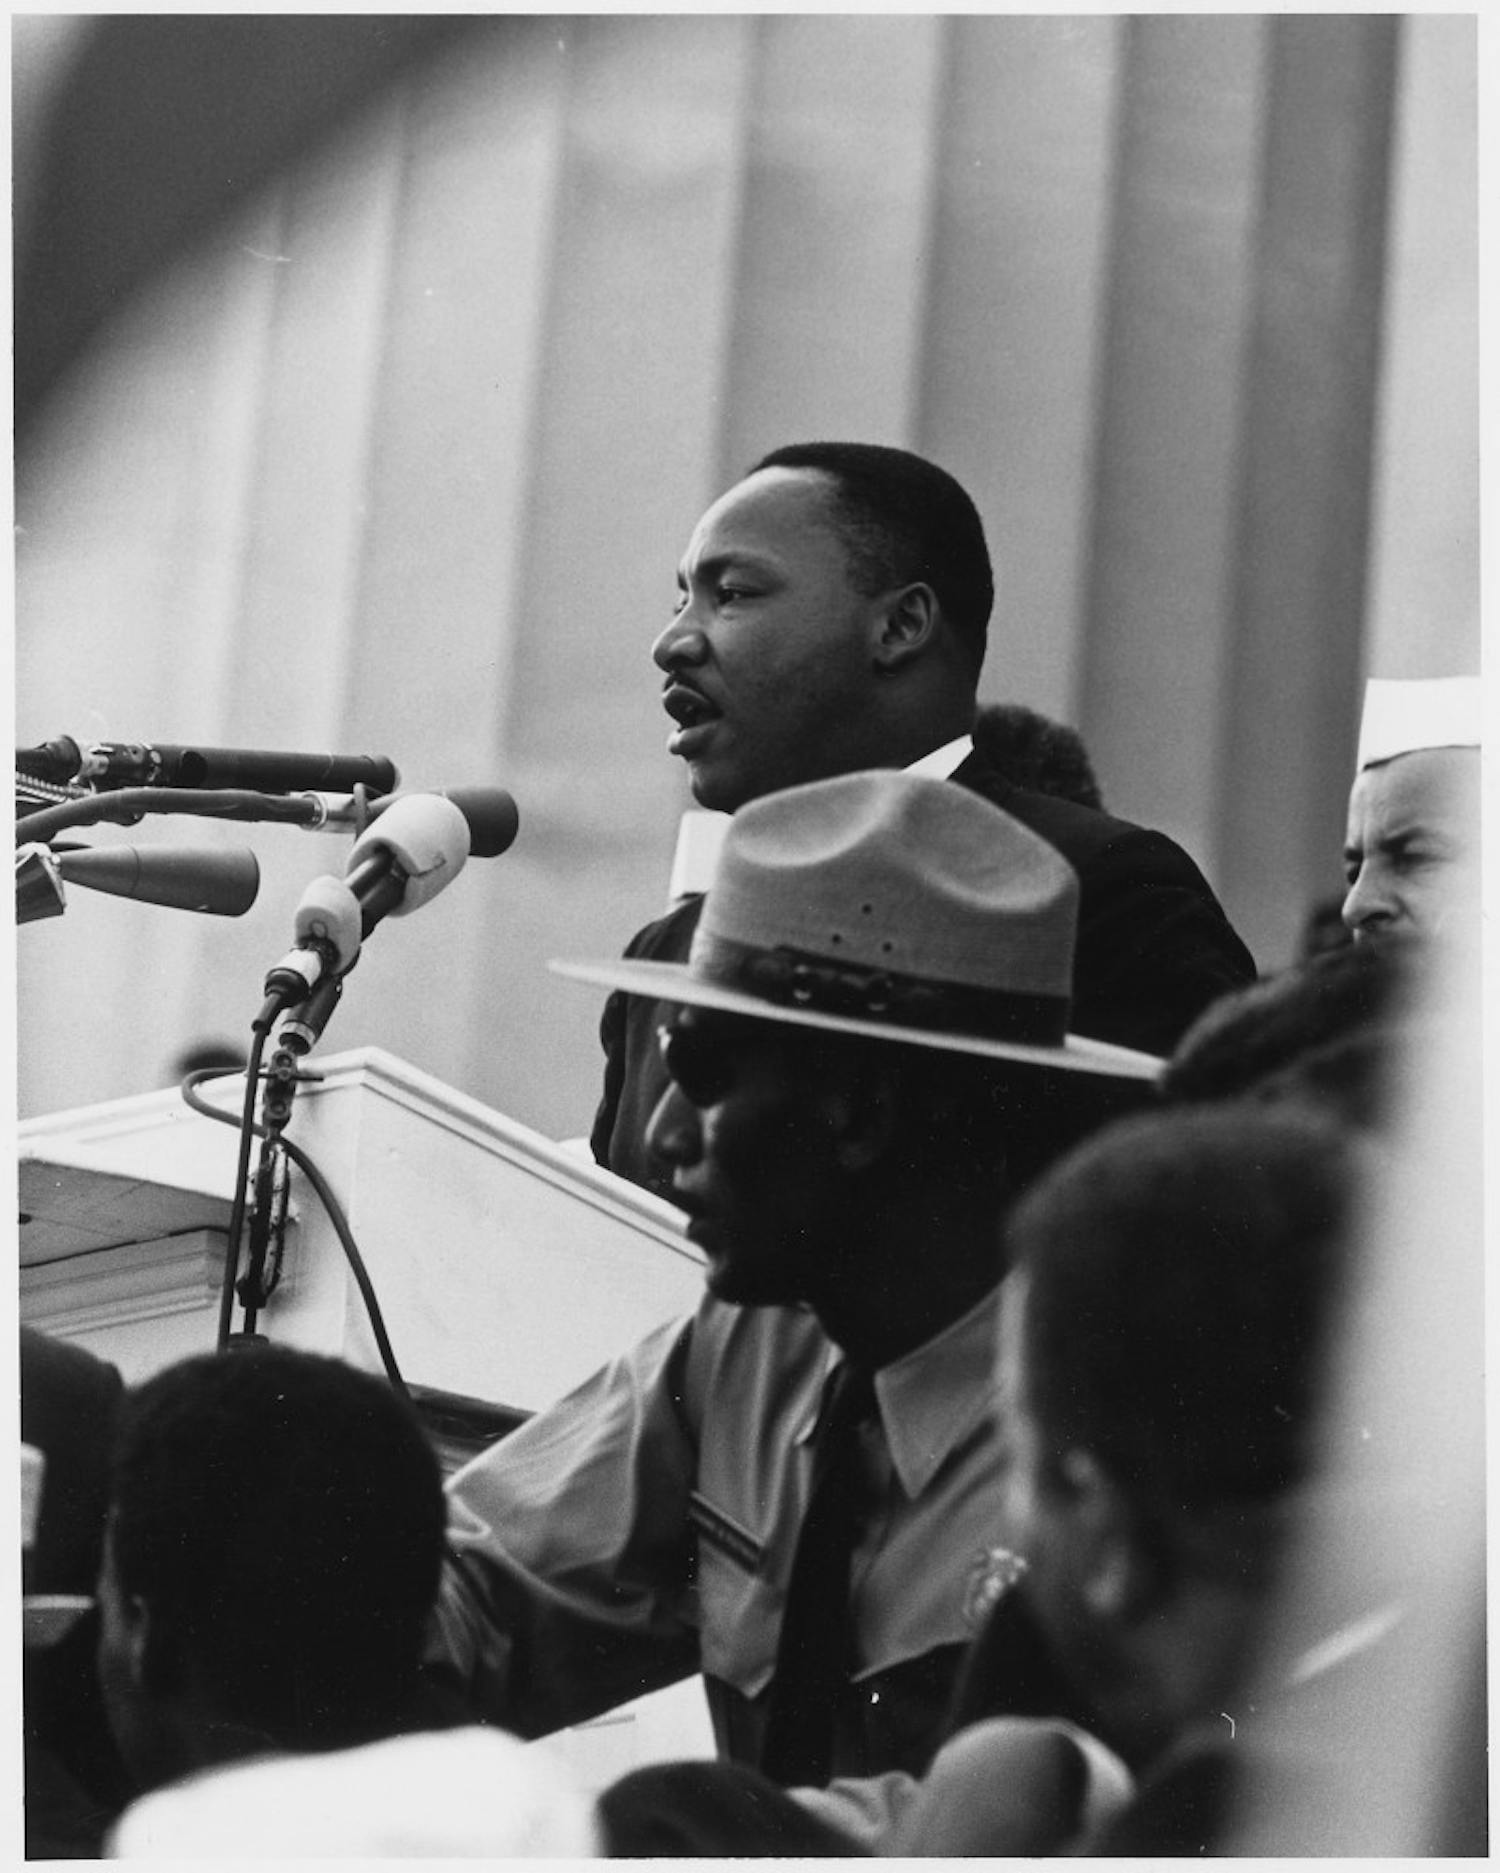 Martin Luther King speaks at a Civil Rights March on Washington, DC, on Aug. 28, 1963.